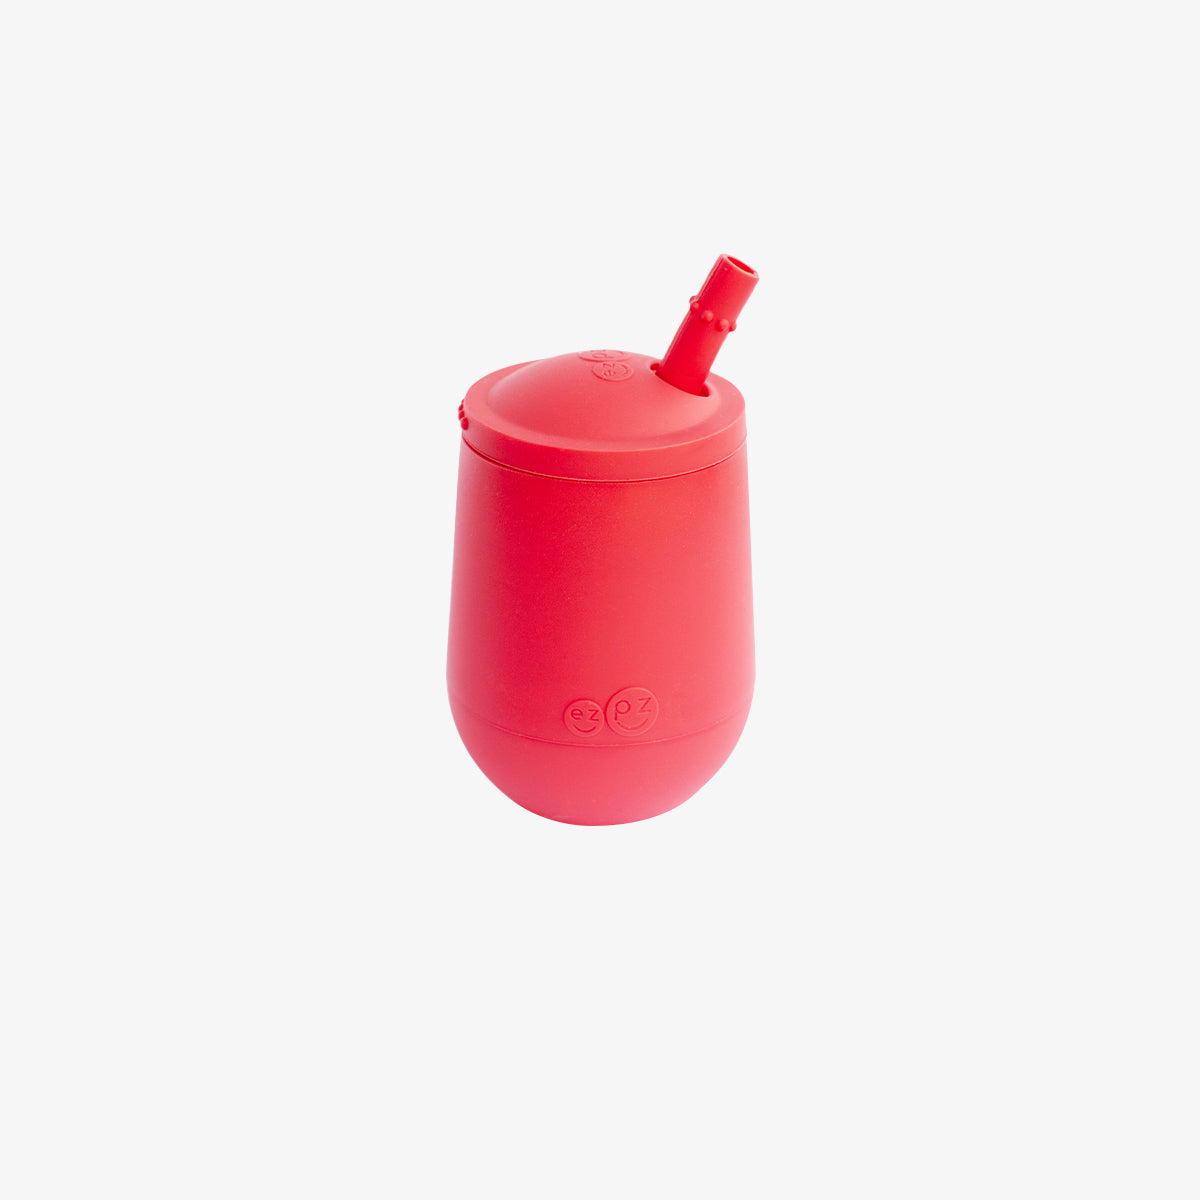 The Mini Cup + Straw in Coral by ezpz / Silicone Drinking Cup and Straw Training System for Toddlers